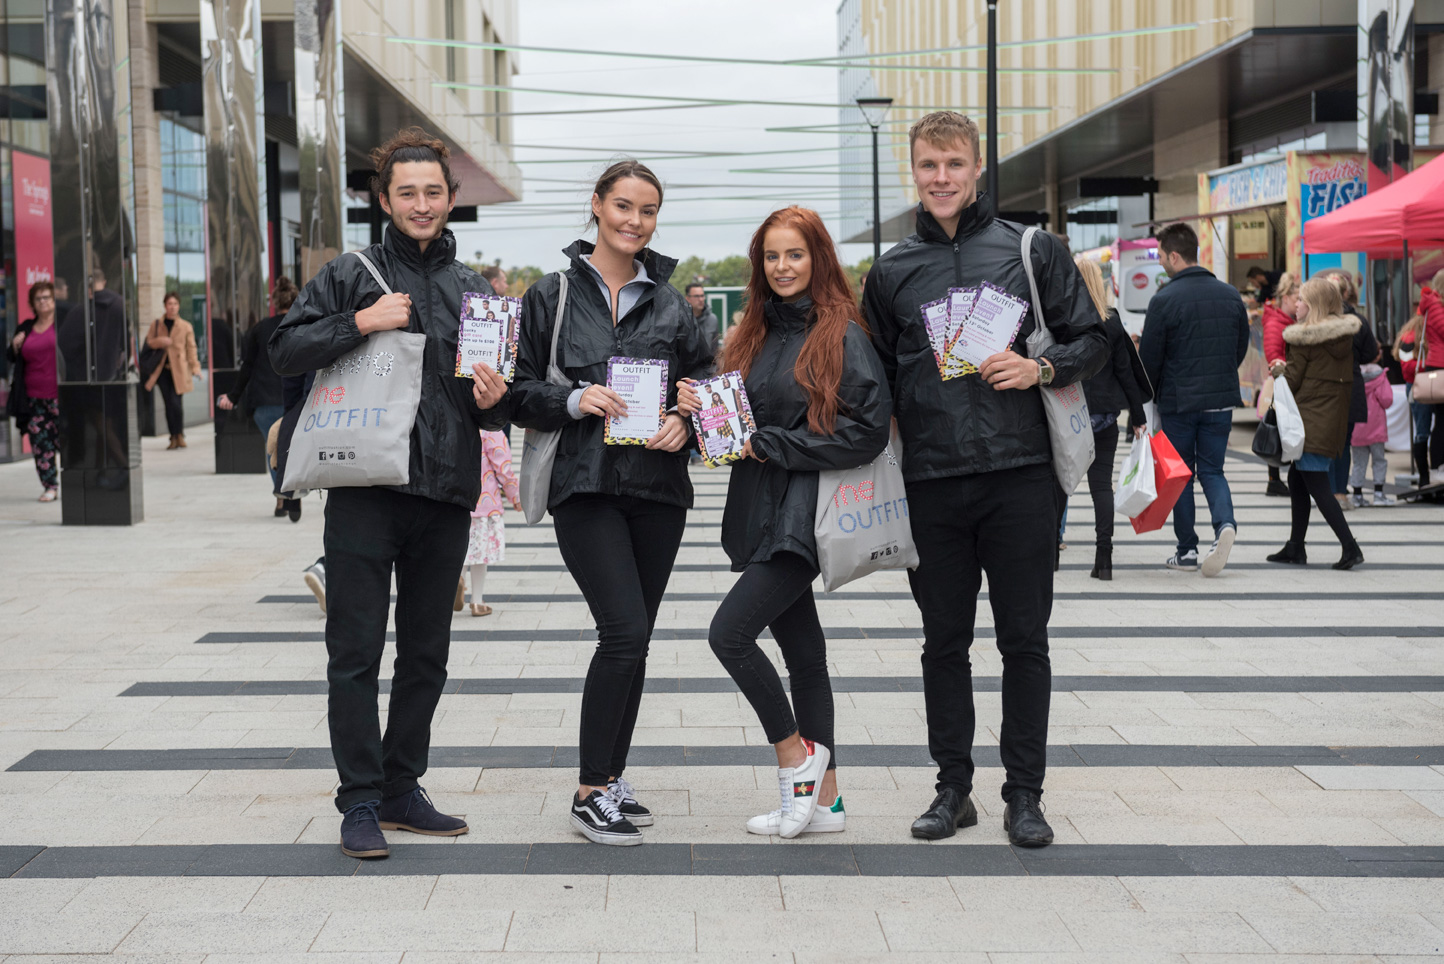 Outfit retail promotional brand ambassadors at retail park in Leeds